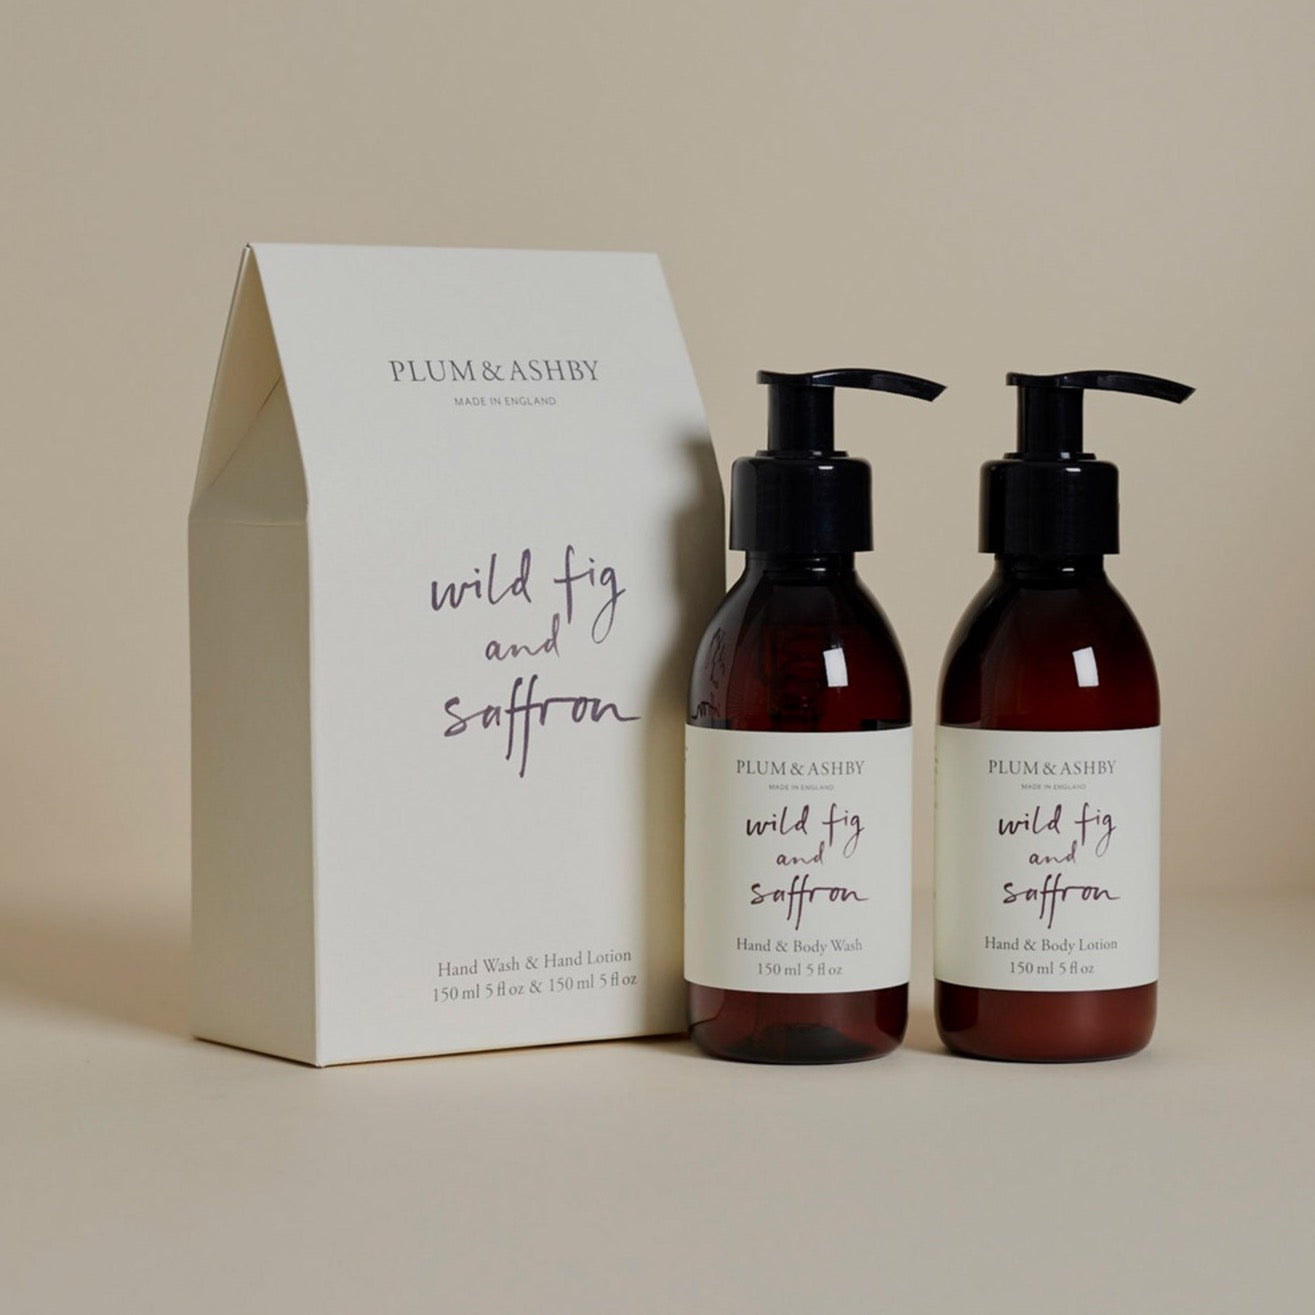 Plum & Ashby Hand Wash and Hand Lotion Duo Gift Set